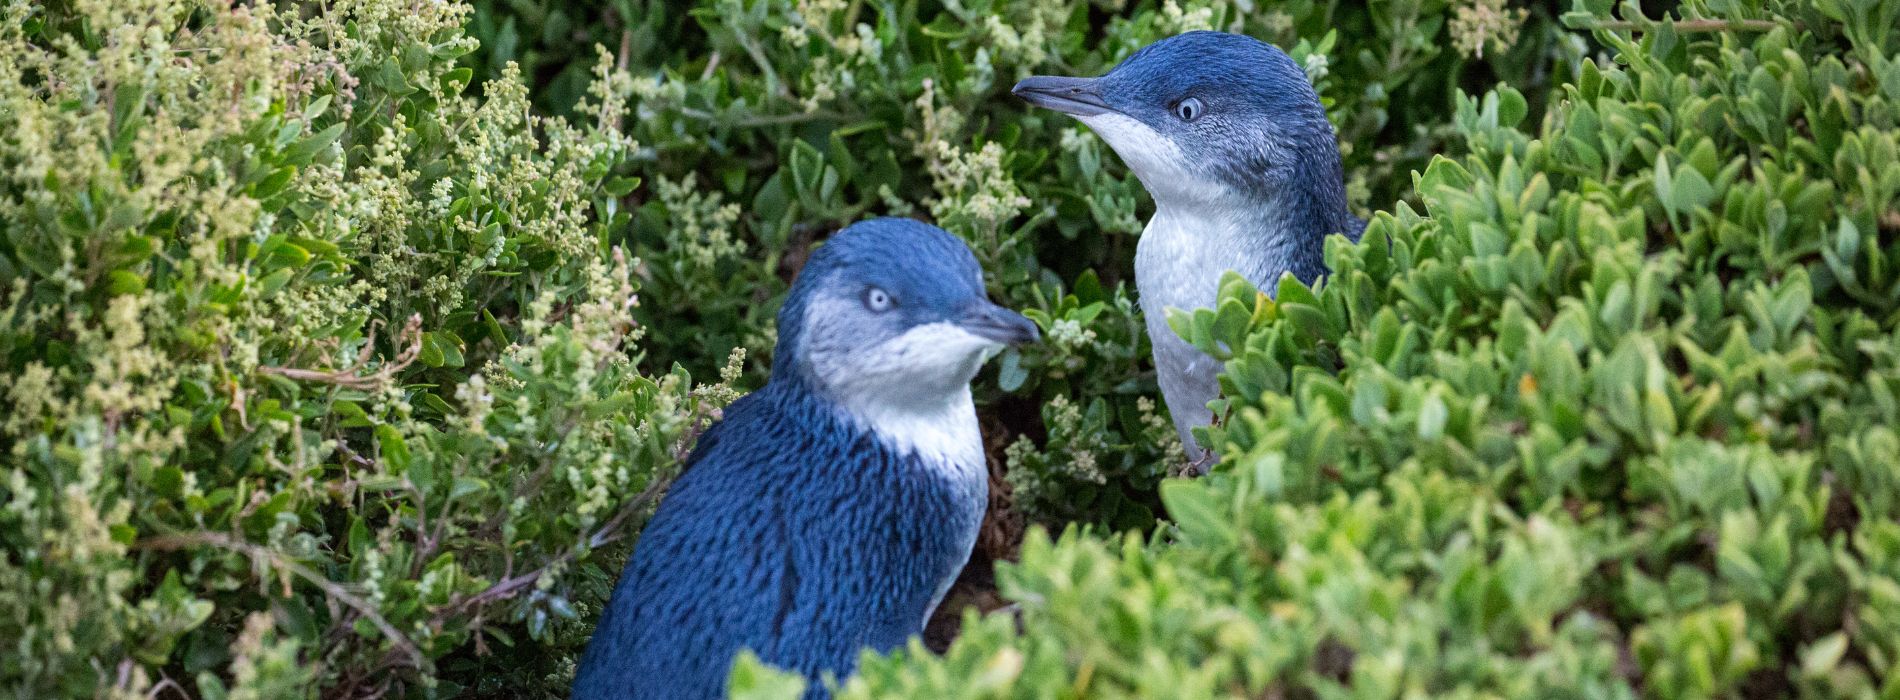 Are fairy penguins real?